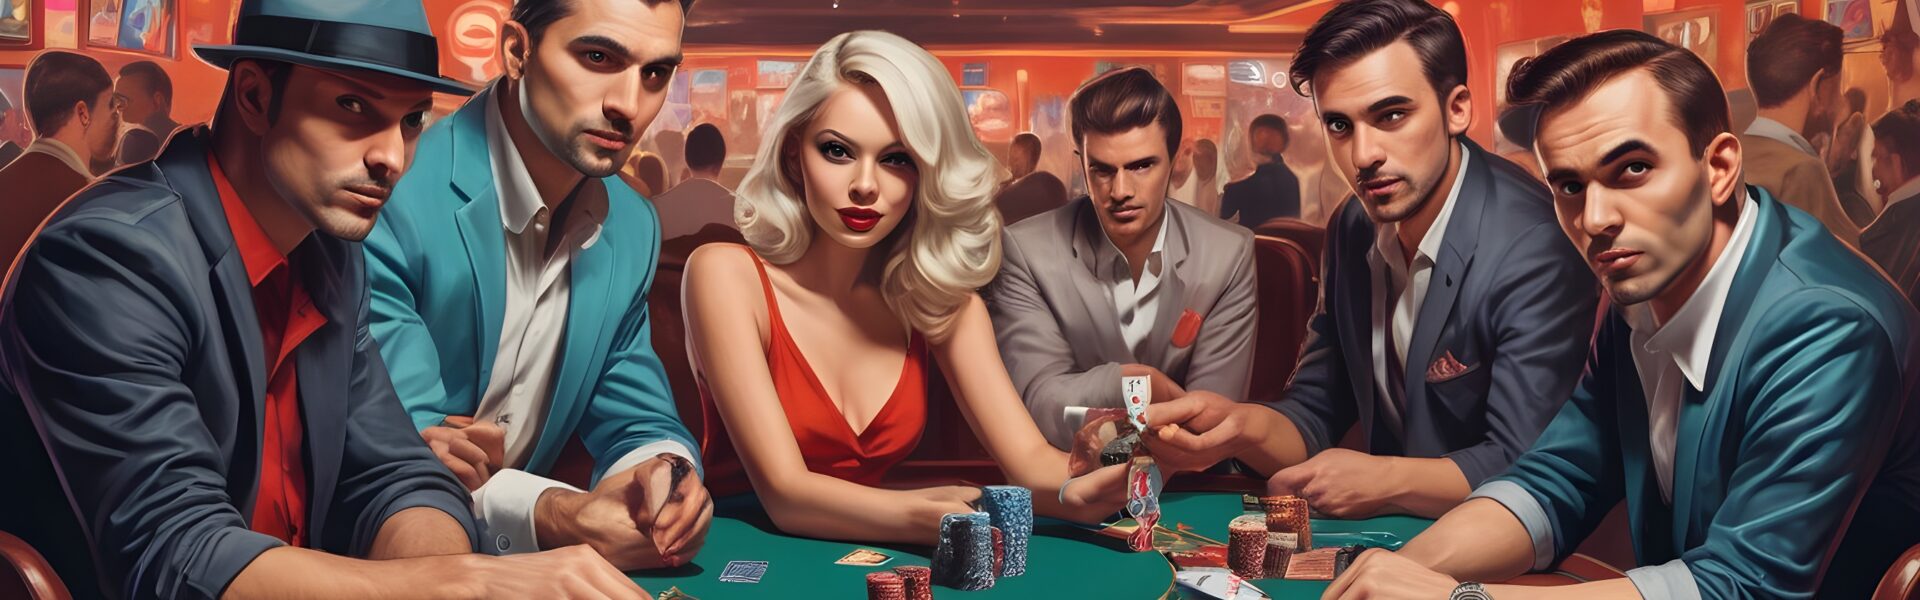 Poker Power: Discover how to dominate the casino card game with confidence and triumph in this ultimate guide to poker success. Learn the basics, develop your strategy, understand psychology, manage your bankroll, and continuously improve to unleash your poker power.